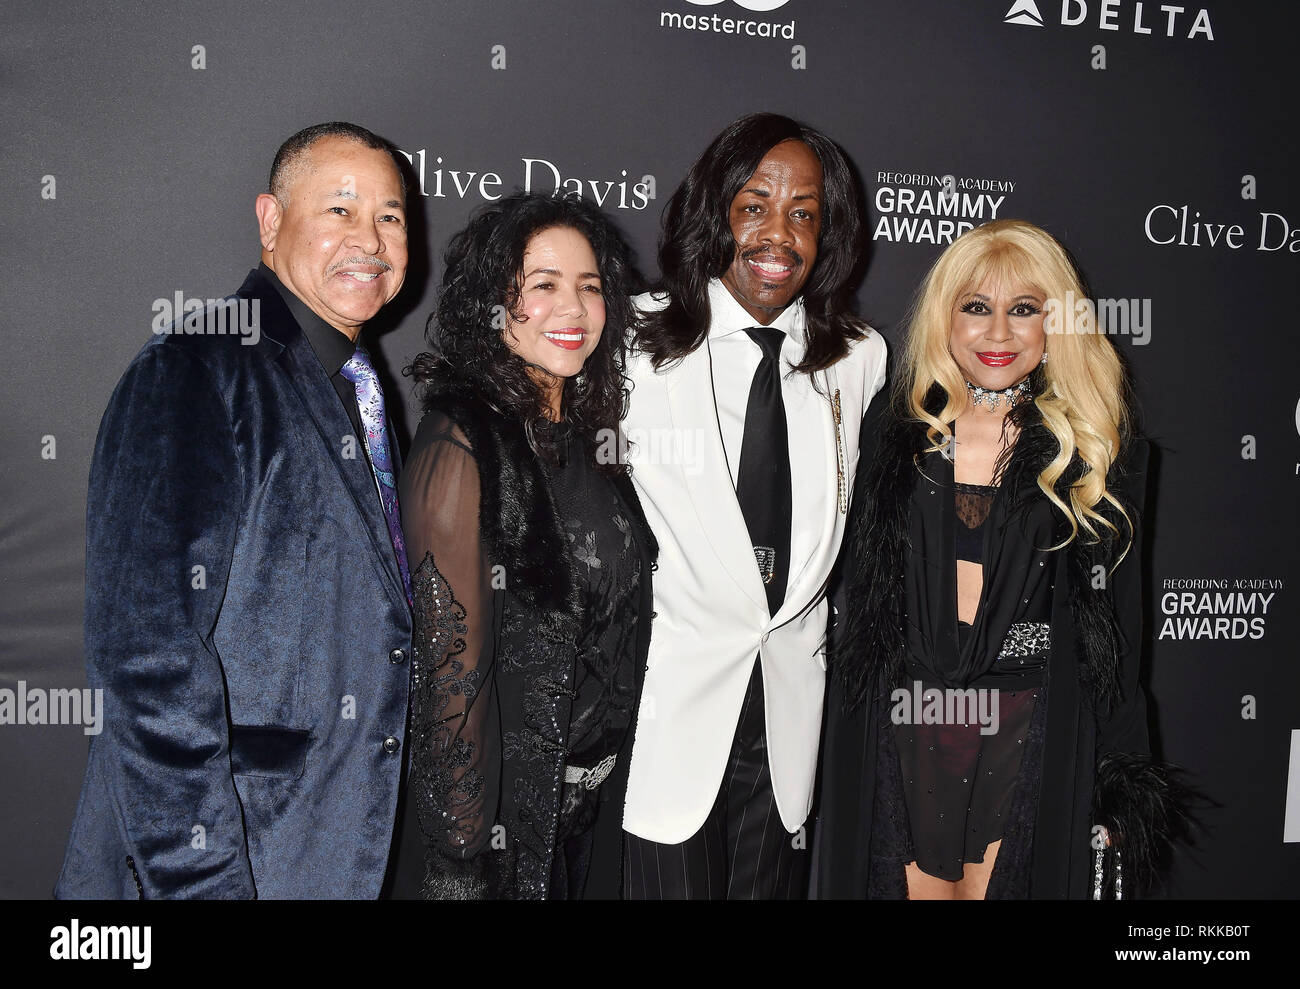 BEVERLY HILLS, CA - FEBRUARY 09: Ralph Johnson (L) and Verdine White (2nd R) of Earth, Wind & Fire and guests attend The Recording Academy And Clive D Stock Photo